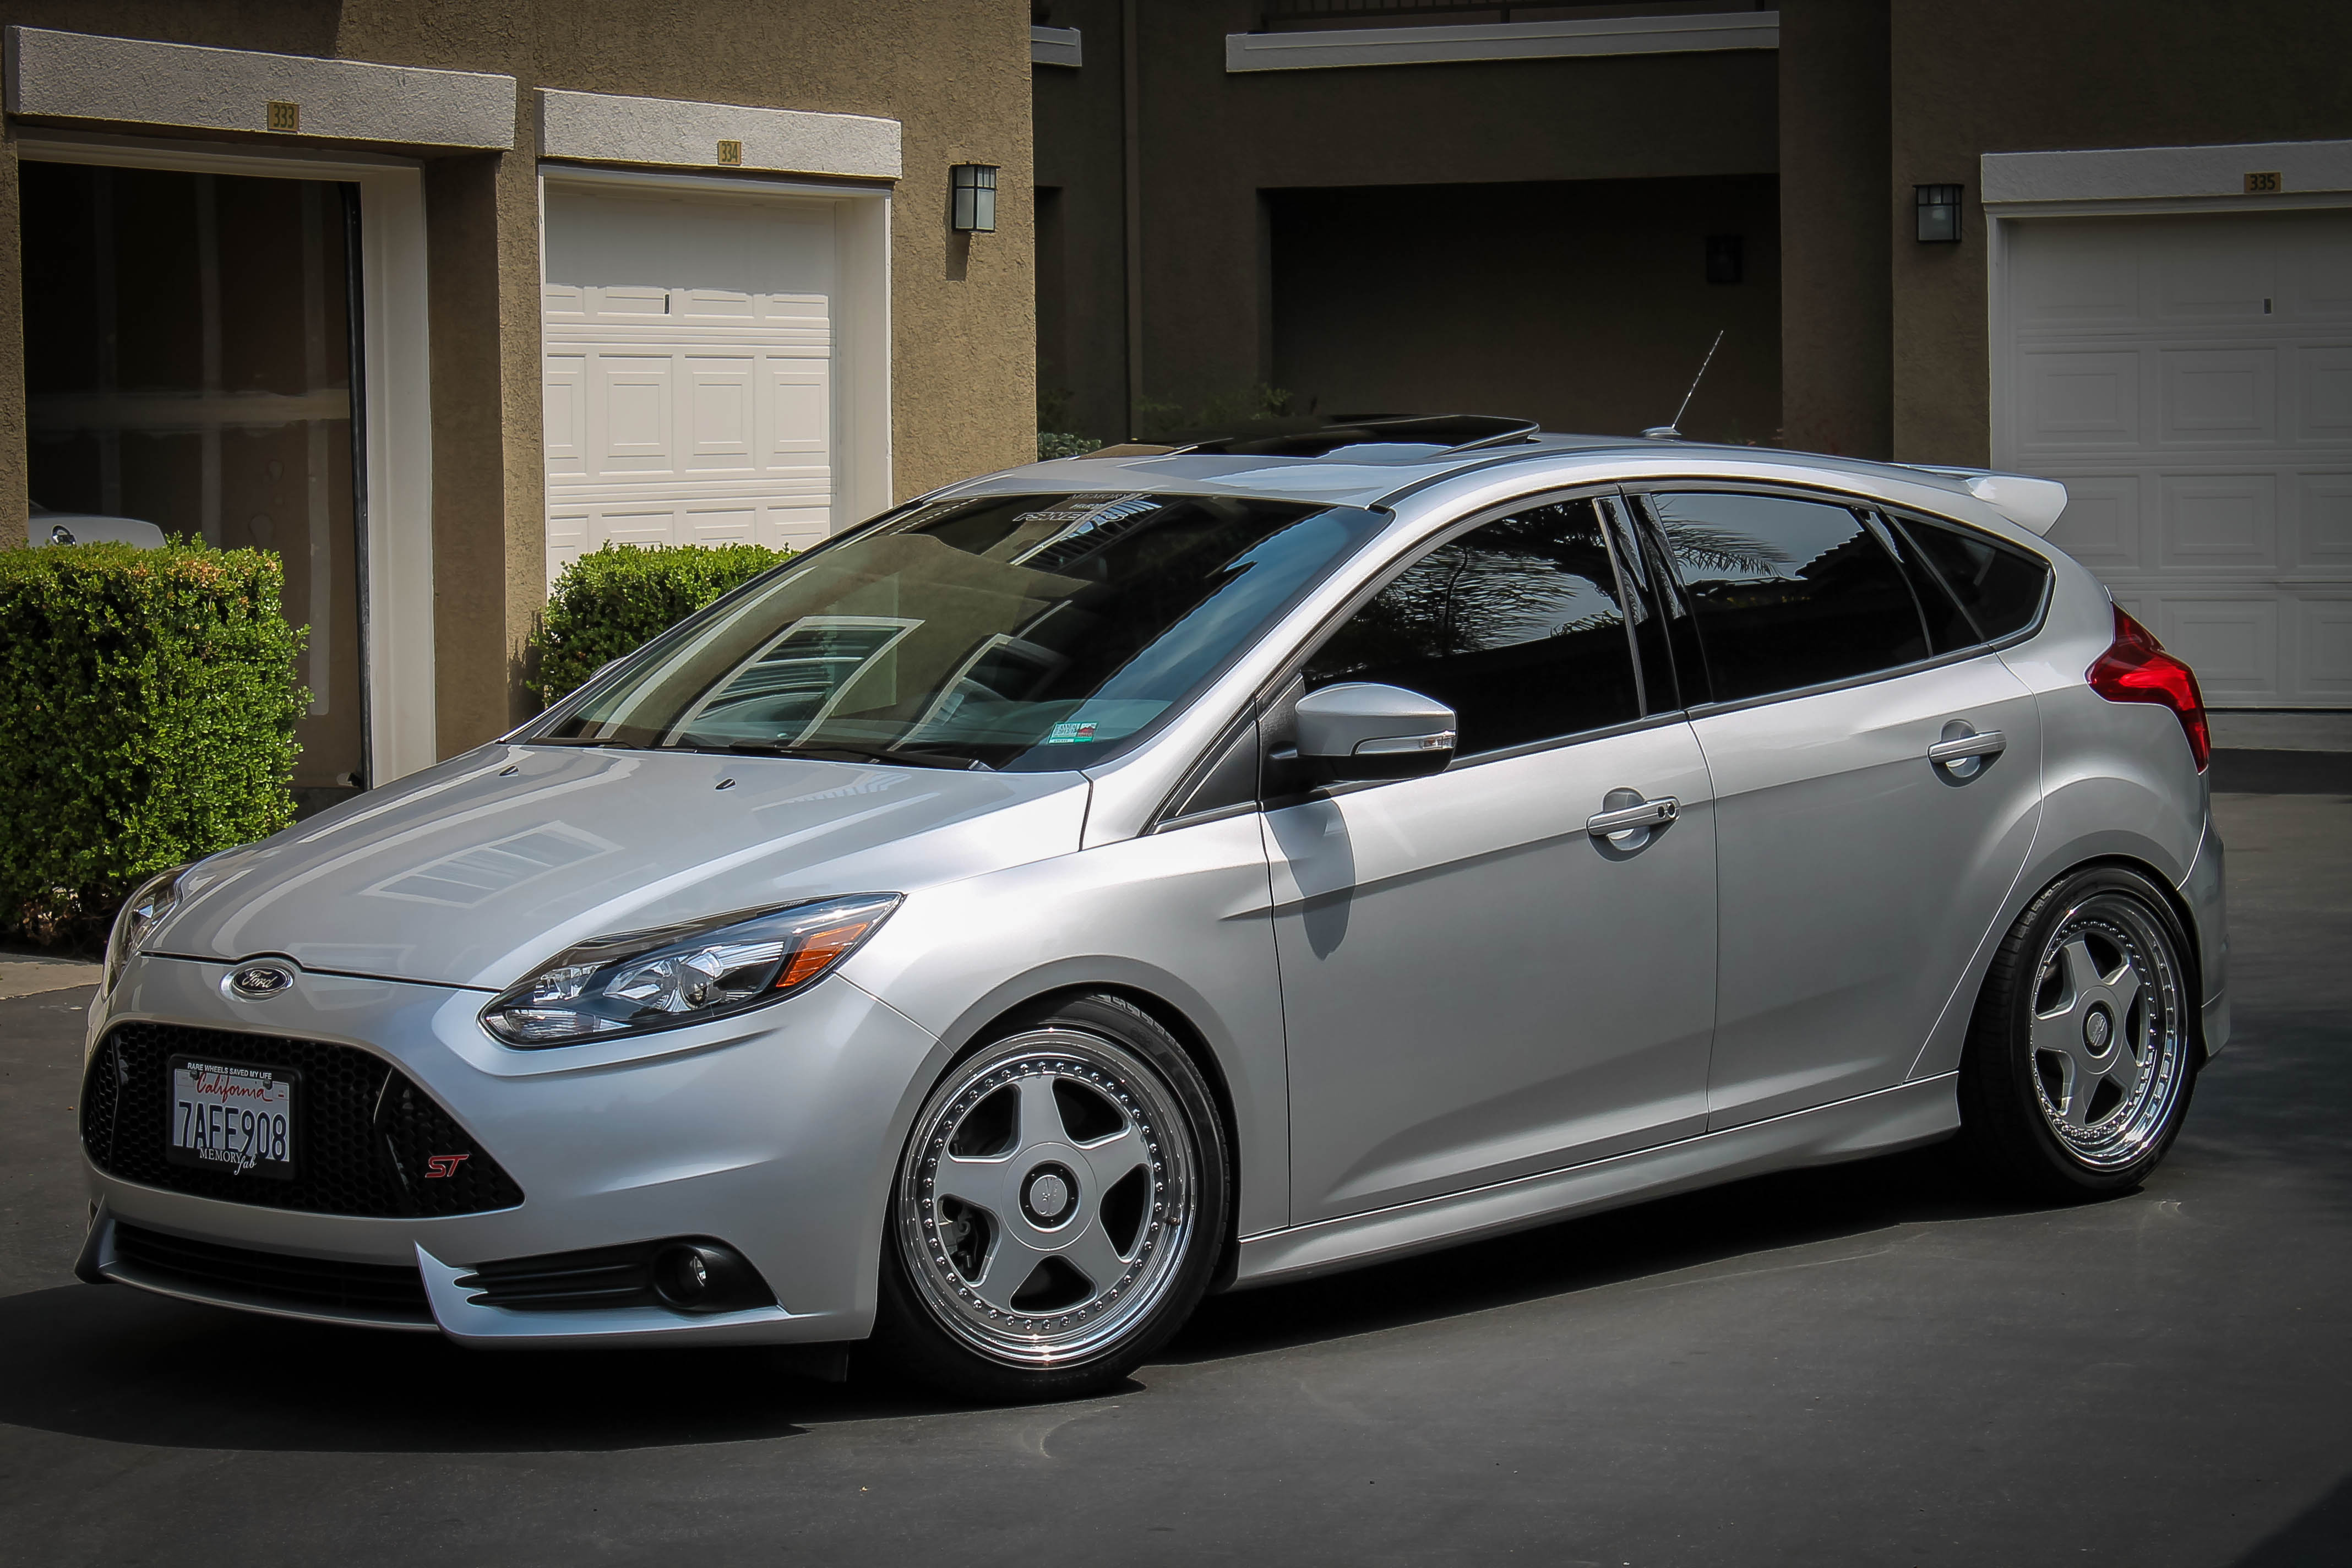 Ford Focus ST mk3 tuning blue and gray rims  Ford focus hatchback, Ford  focus st, Ford focus